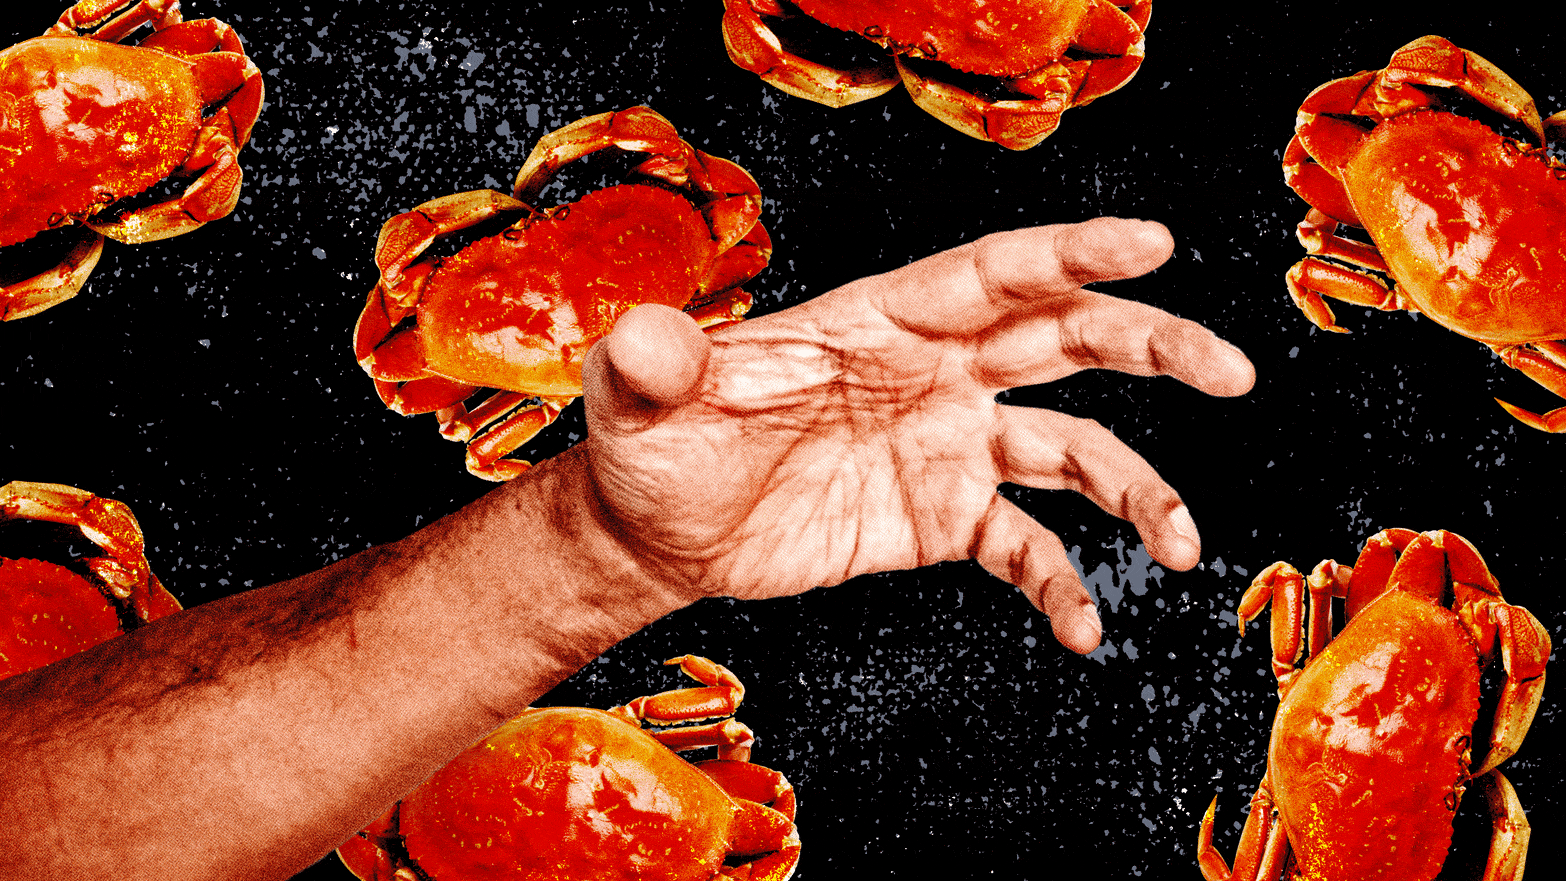 An outstretched hand surrounded by crabs